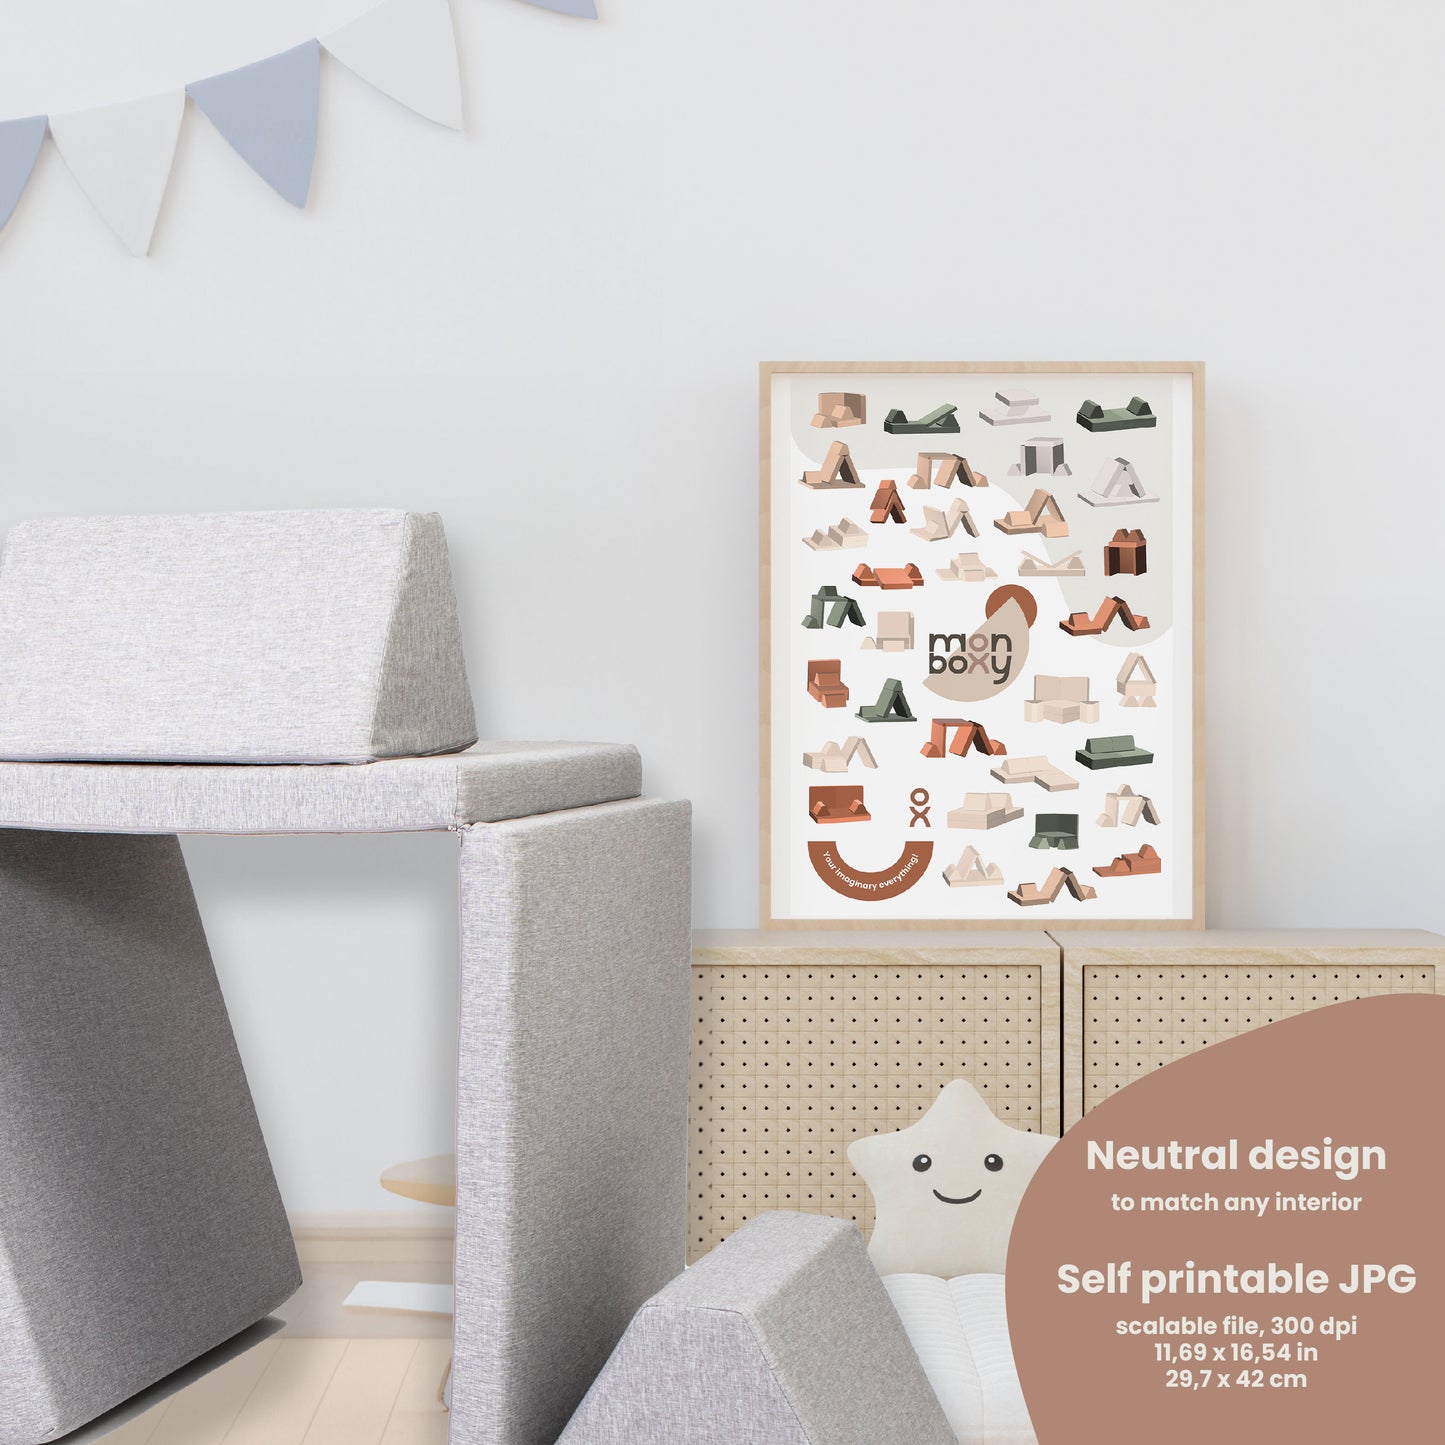 Activity sofa build ideas poster - Muted colors | digital download